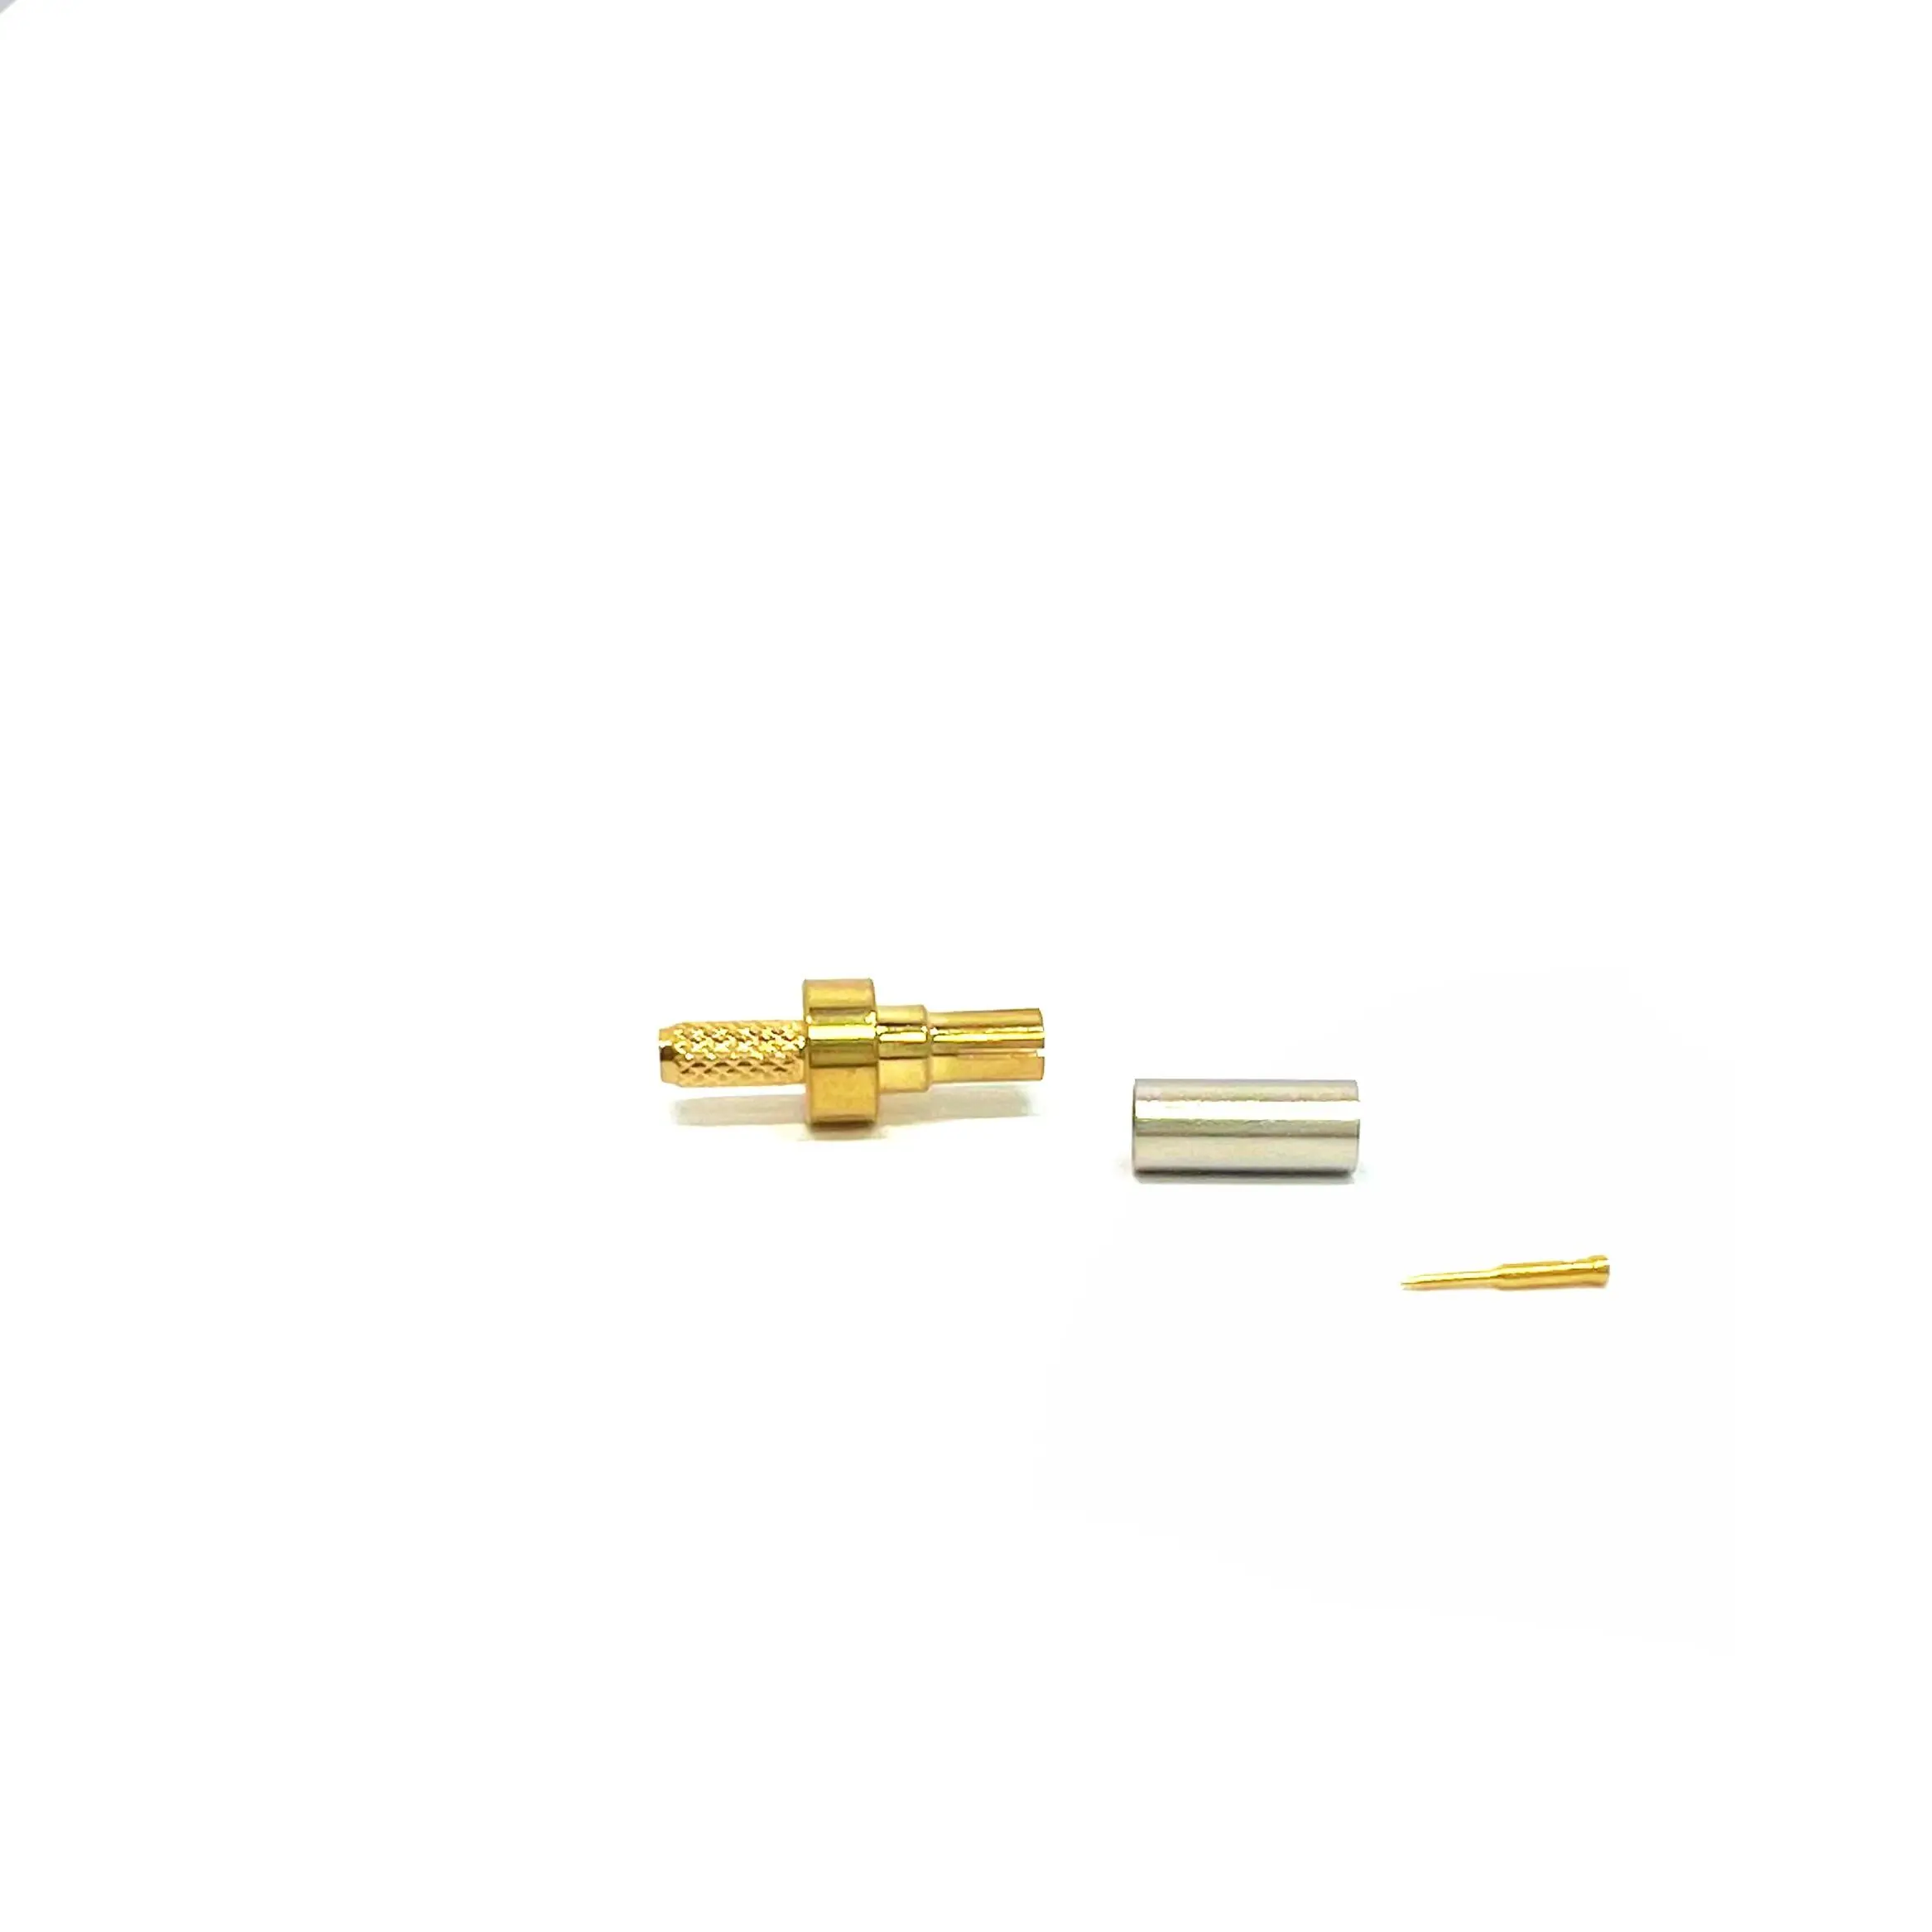 Gold plated RF TS9 male plug for rg316 rg174 lmr100 cable straight rf coaxial connector factory